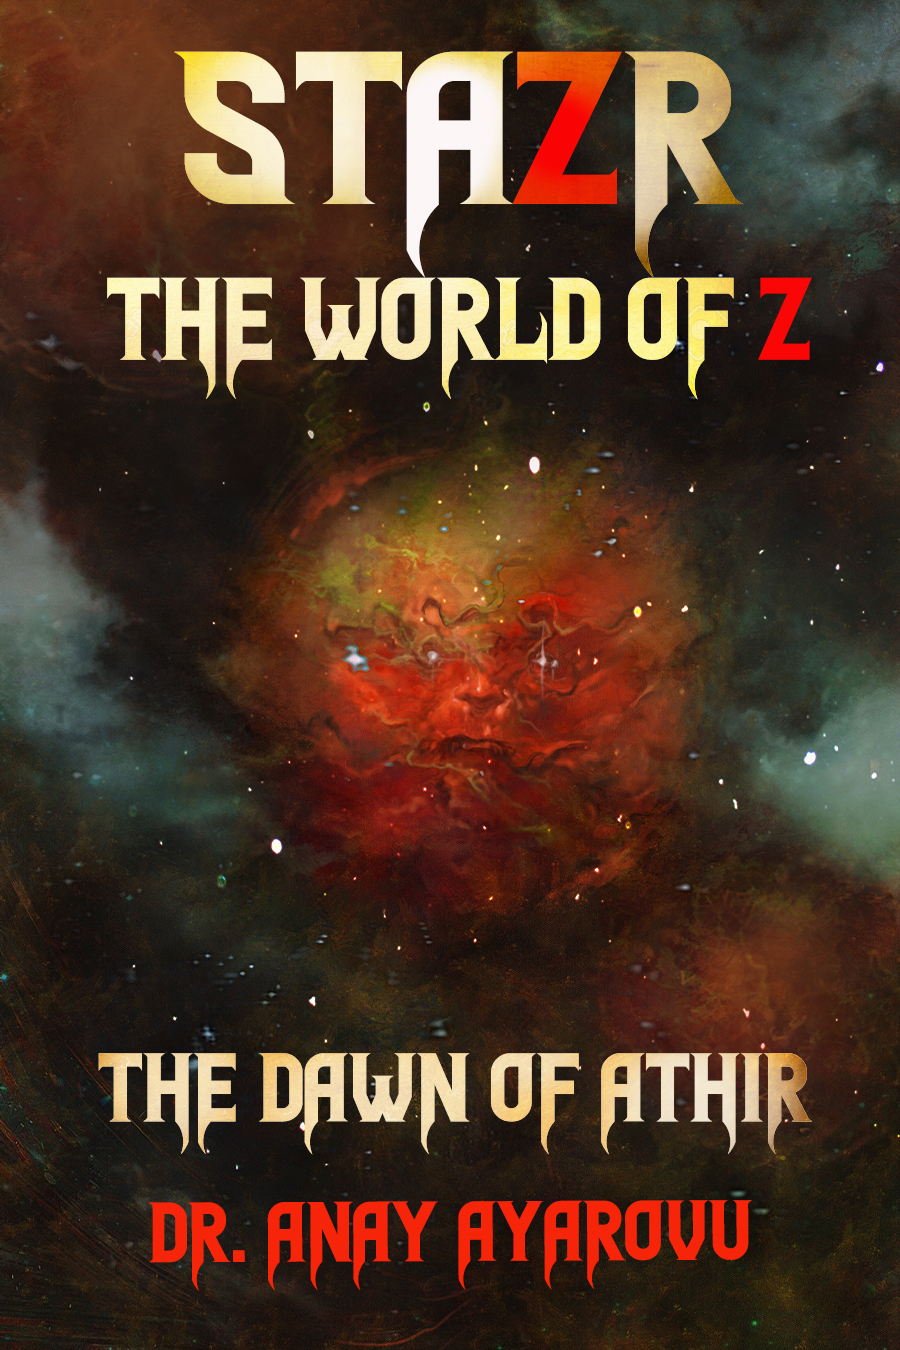 STAZR The World Of Z: The Dawn of Athir